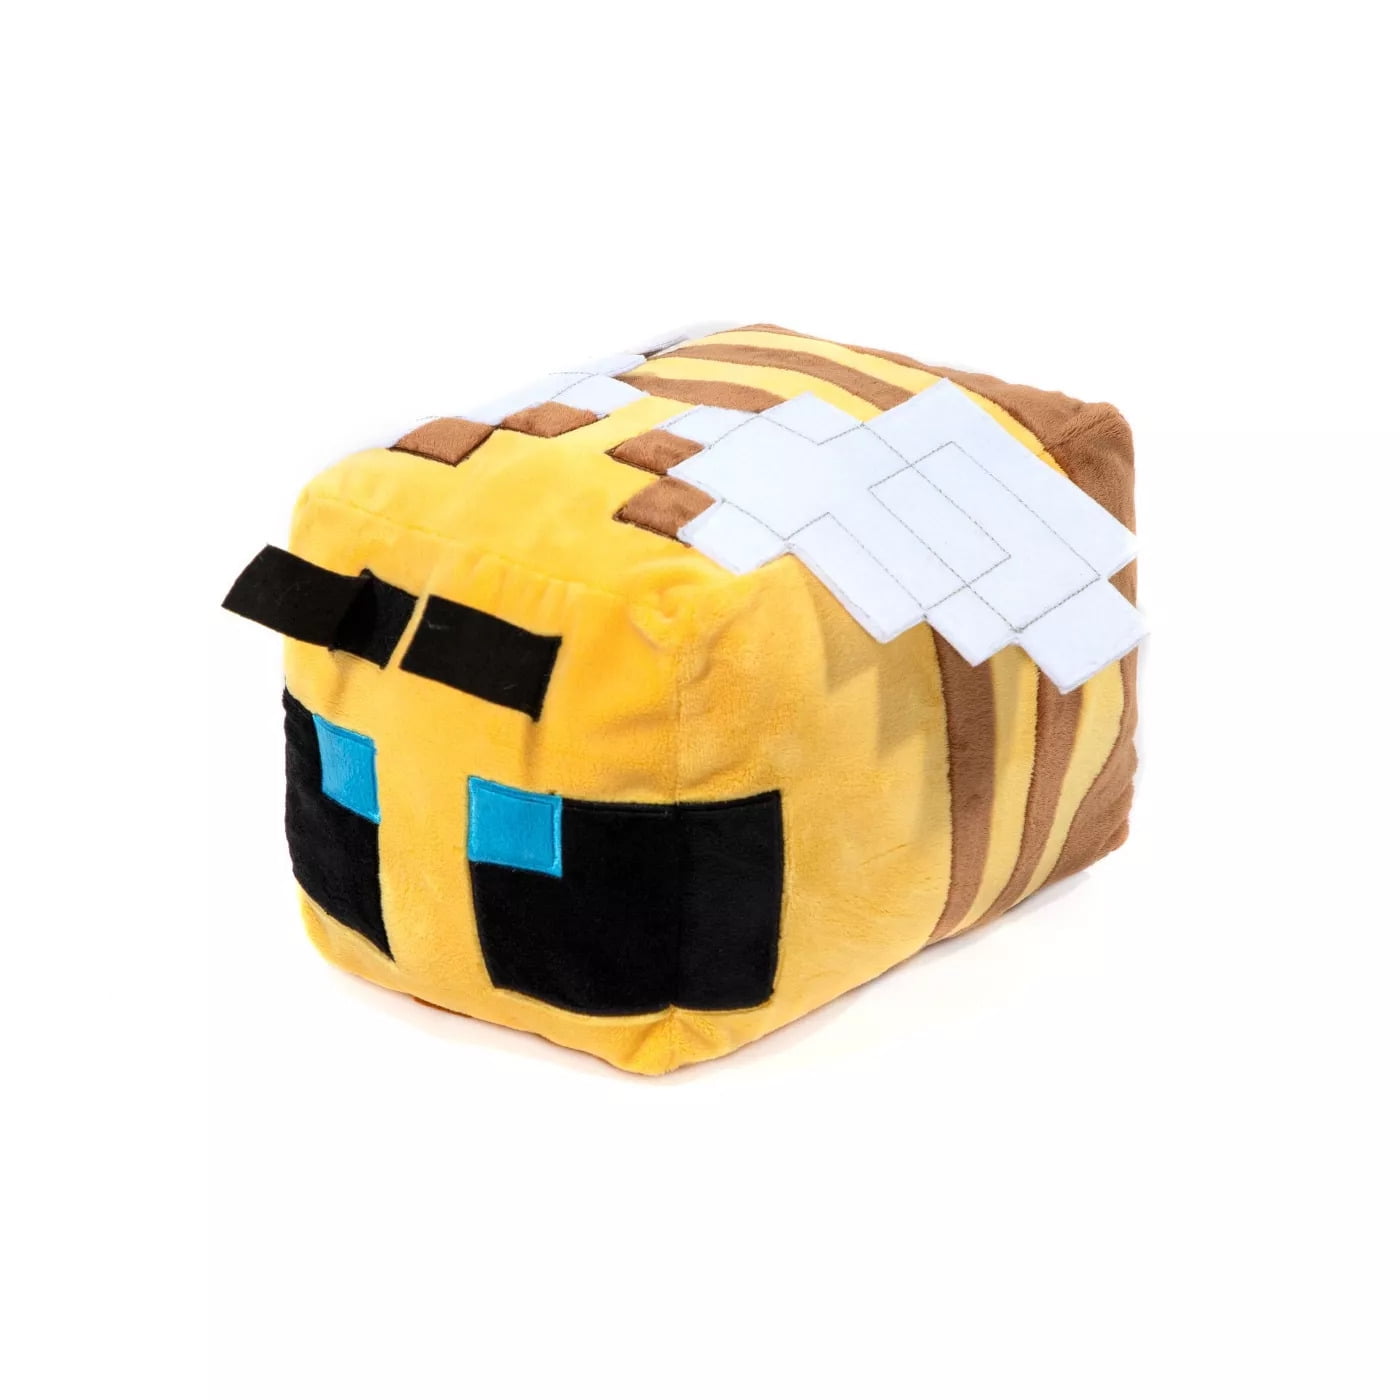 Minecraft 12" Bee Pillow Buddy Plush for sale online 